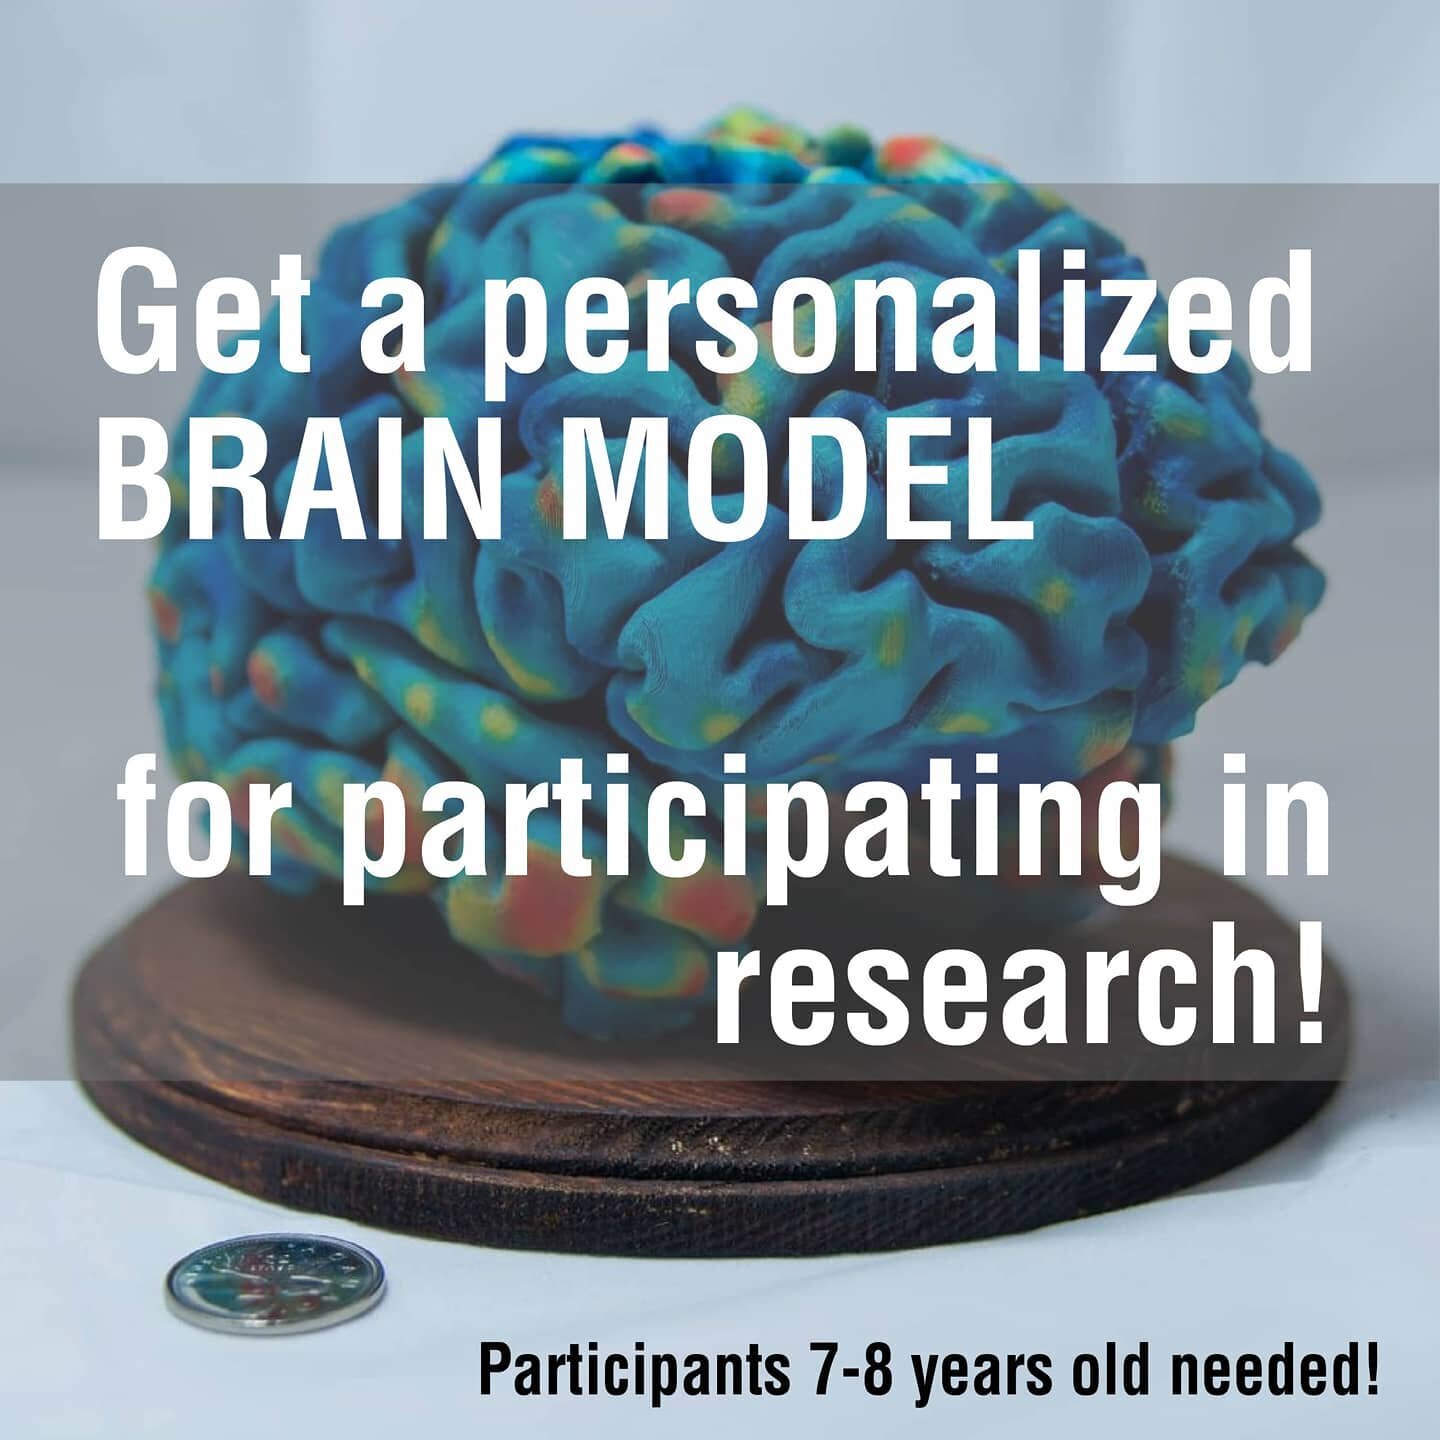 The Bray Lab is partnering with @brainycreations to provide research participants with a personalized, 3D printed brain model!

We're currently looking for&nbsp;participants who are 7-8 years old, as well as their parents. Participation includes ques